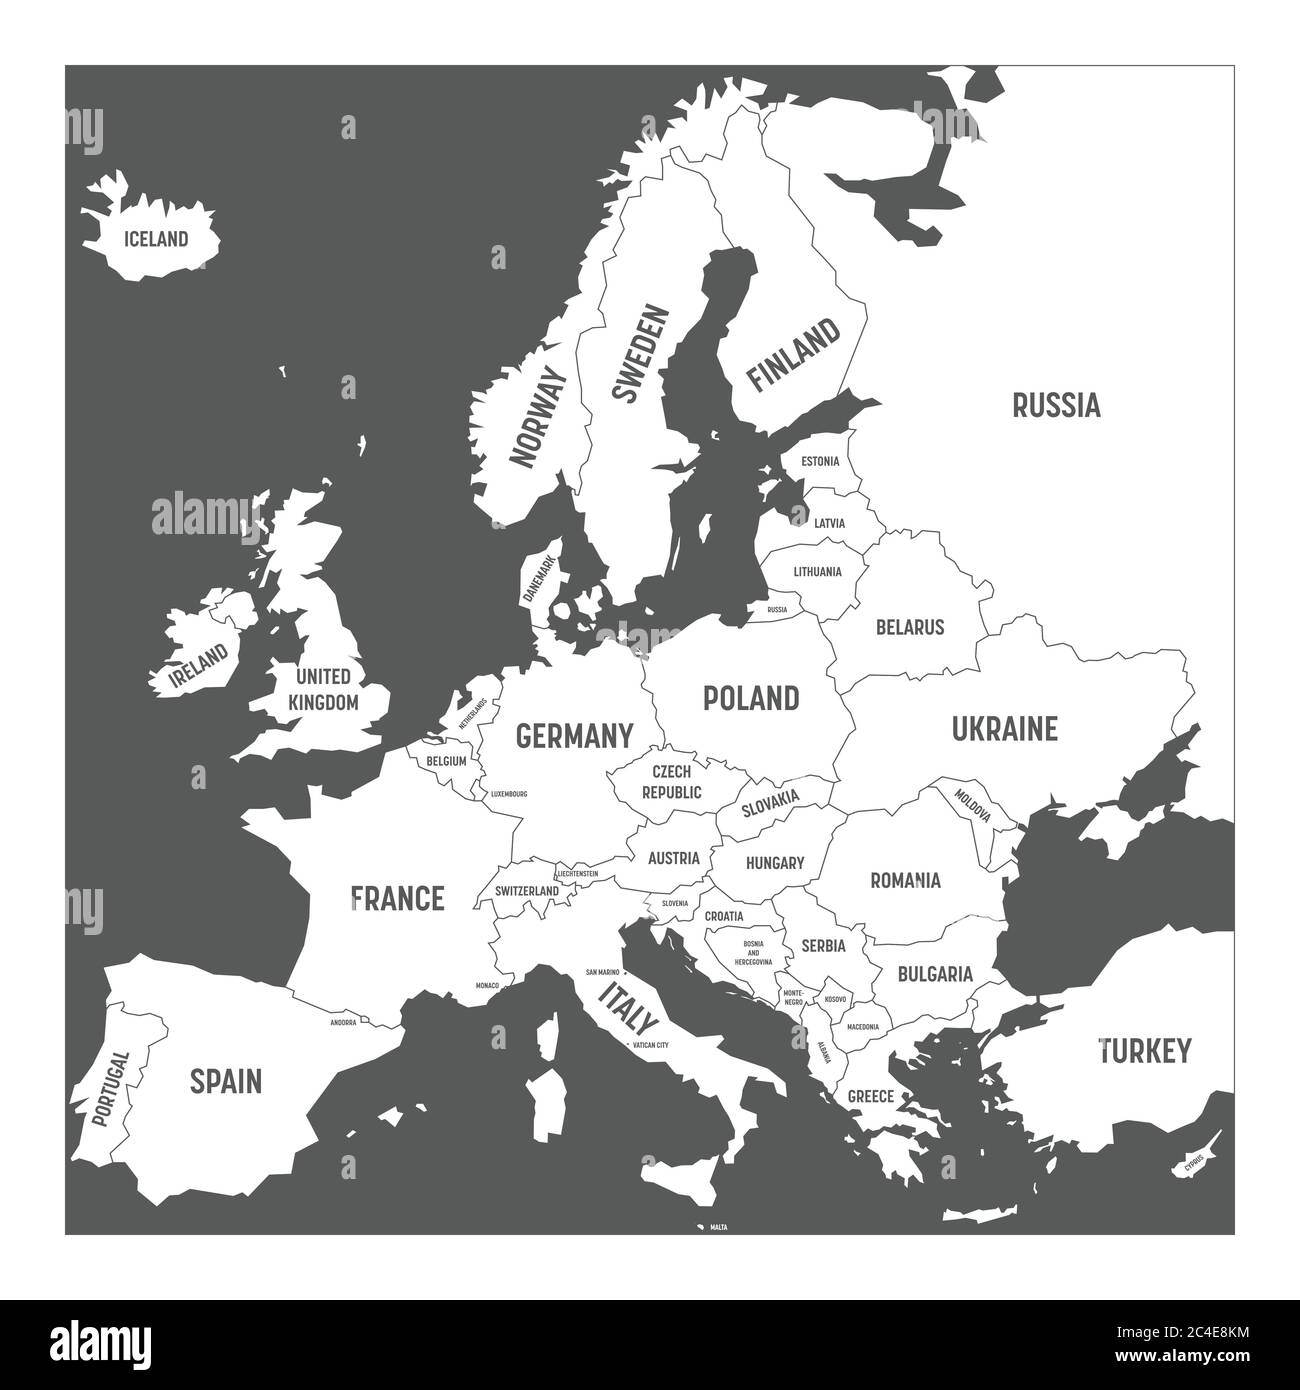 Map of Europe with names of sovereign countries, ministates included. Simplified white vector map on grey background. Stock Vector